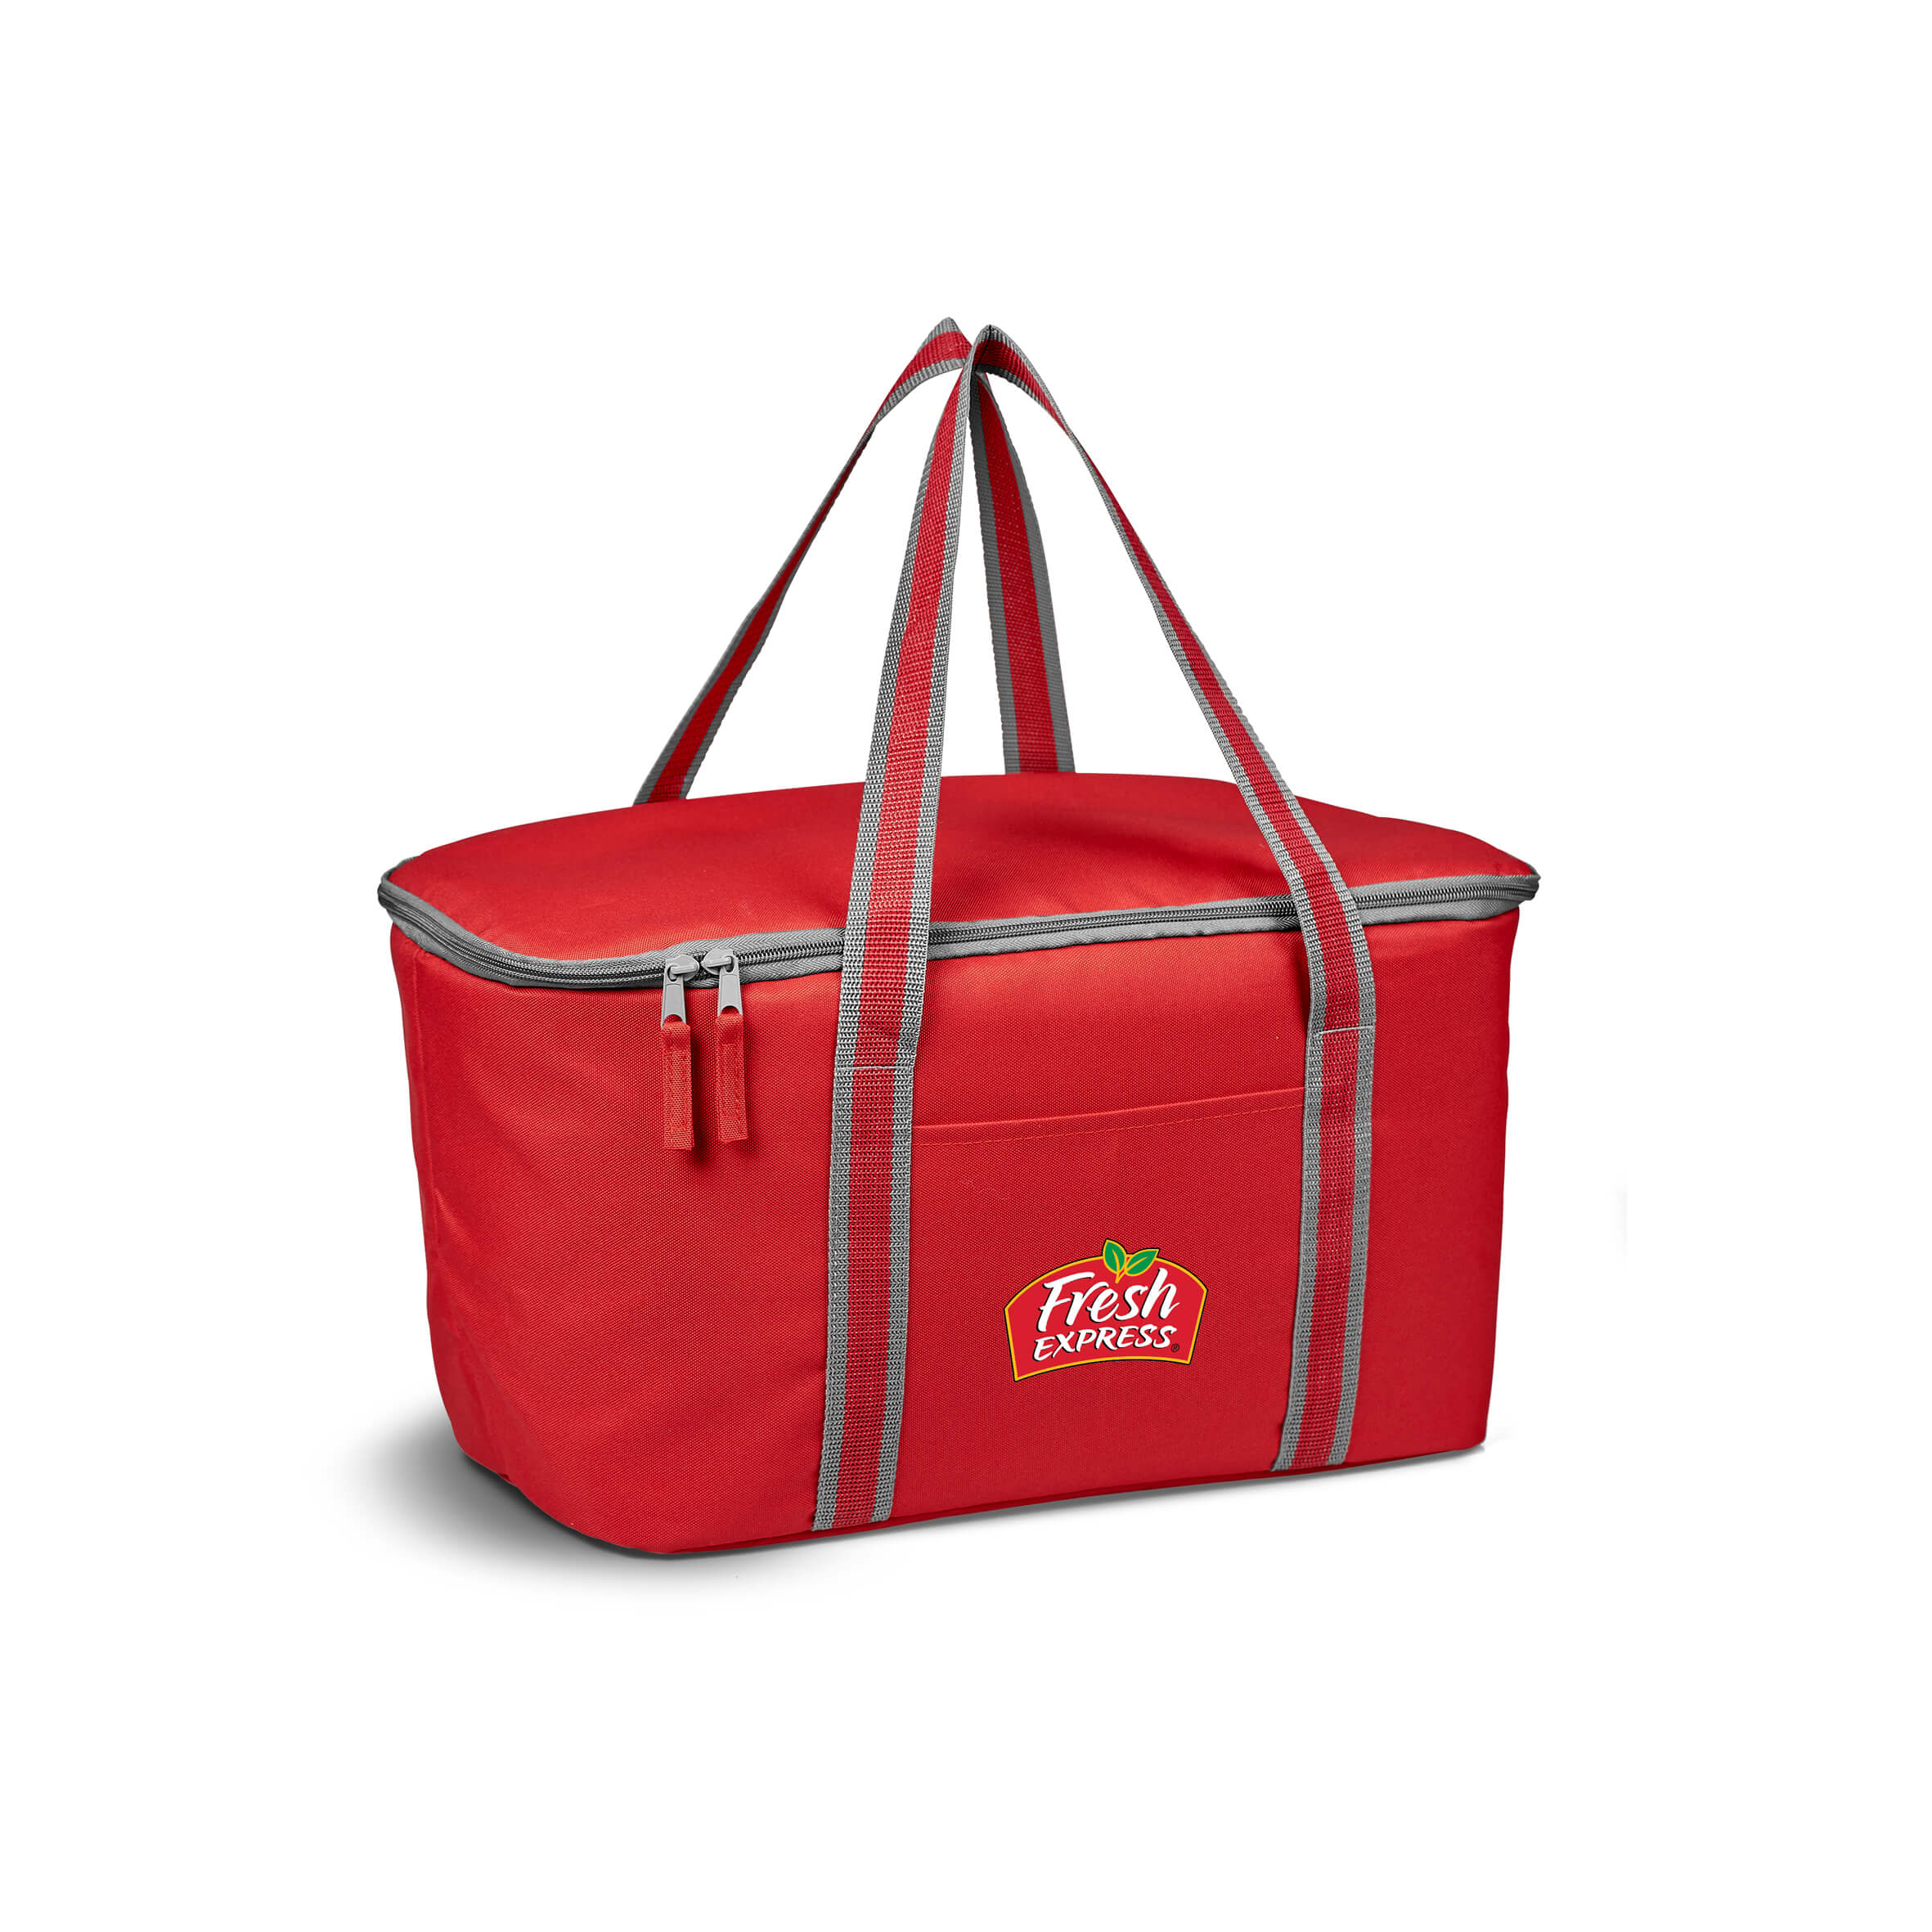 Kooshty Key Largo Recycled PET Cooler Beach and Outdoor Items